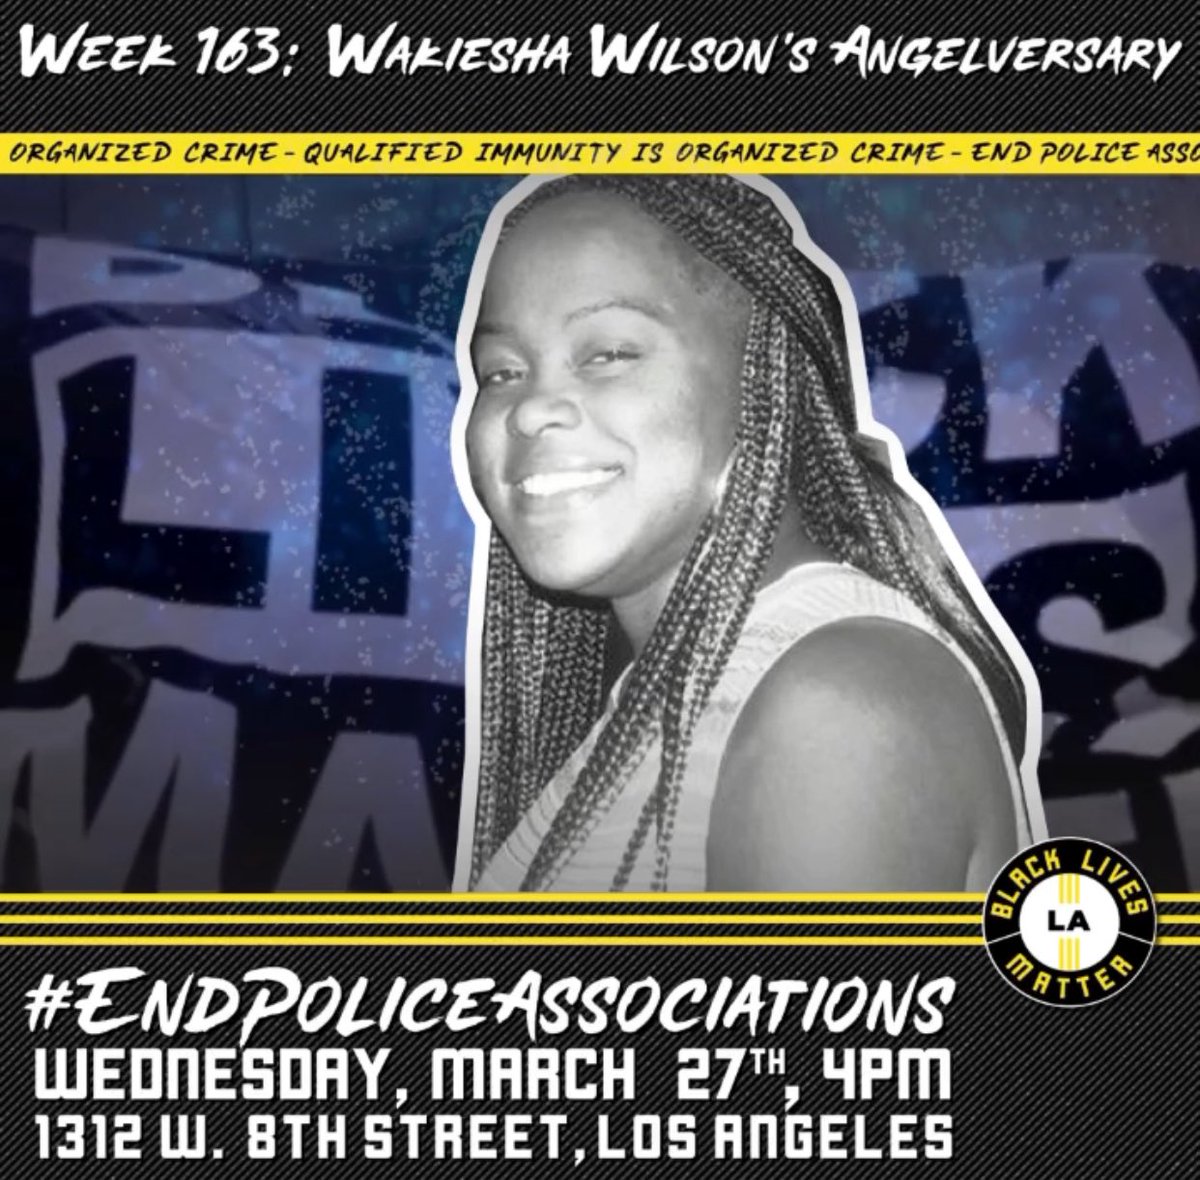 As we say #WakieshaWilson’s name we also fight for justice in her honor. Join her family TODAY AT 4PM - 1313 W. 8th St. #SayHerName #BlackLivesMatter #EndPoliceAssociations